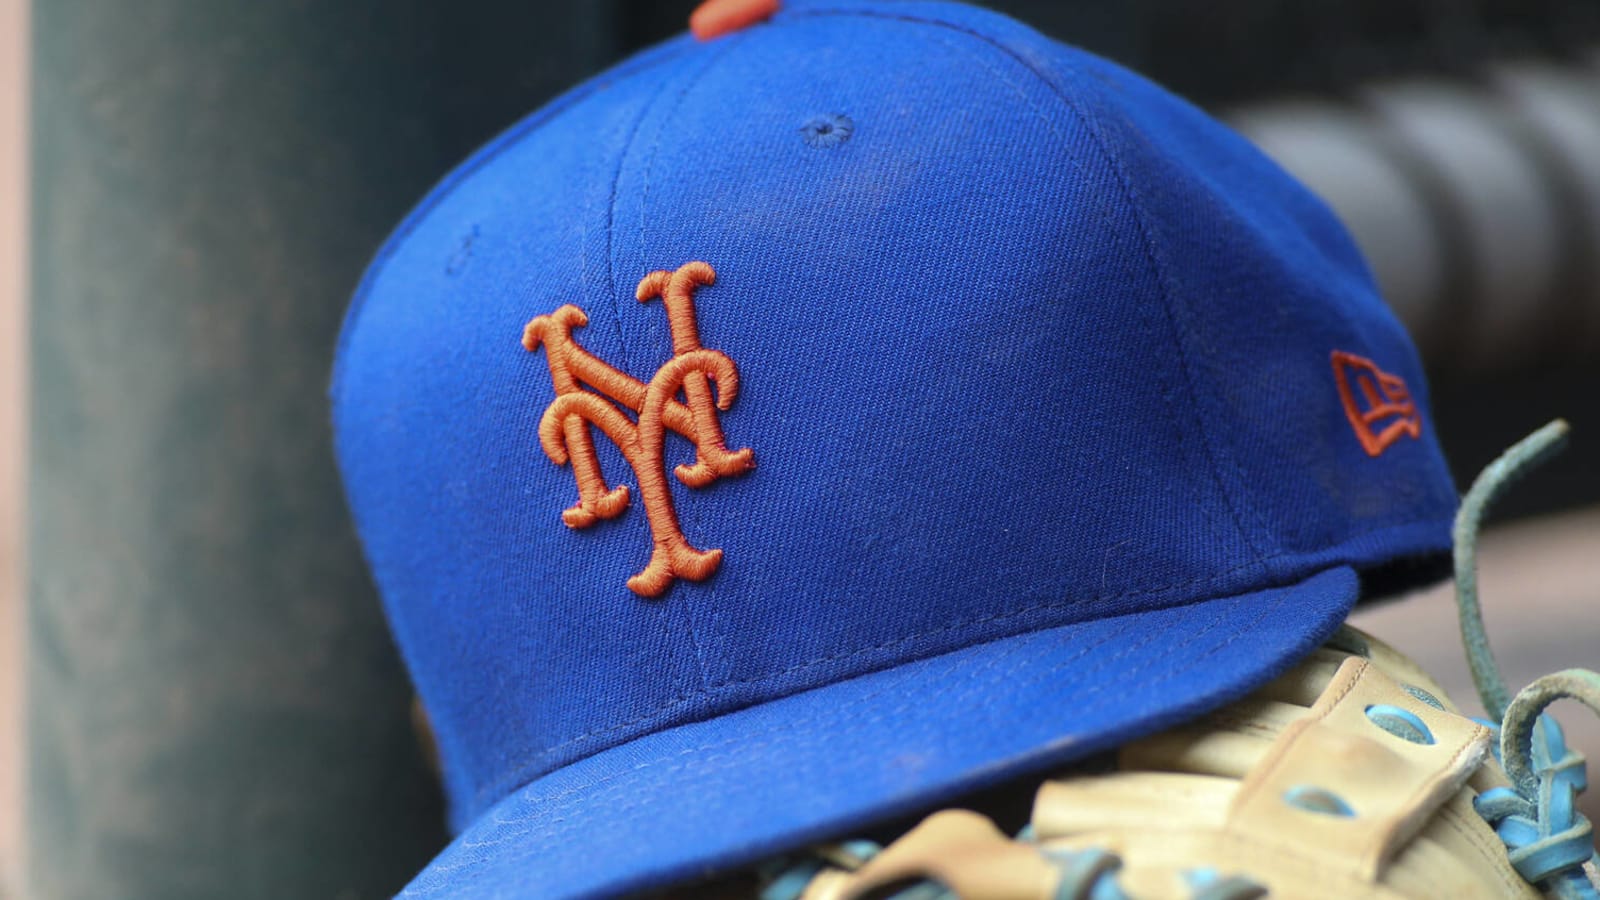 Mets will pursue external candidates for managerial opening